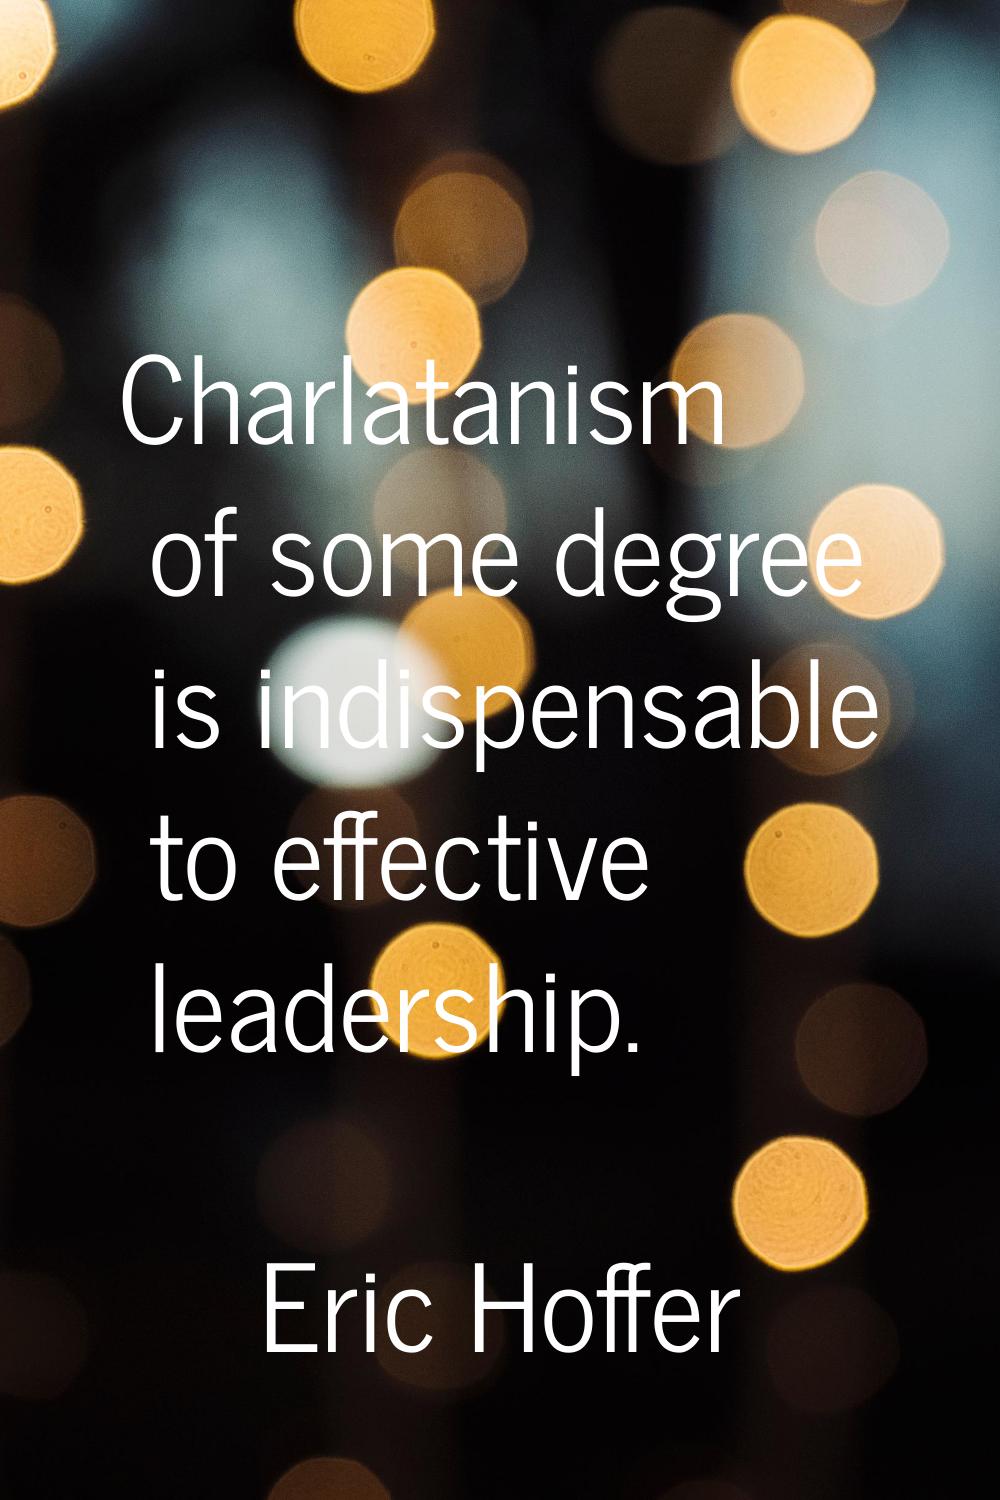 Charlatanism of some degree is indispensable to effective leadership.